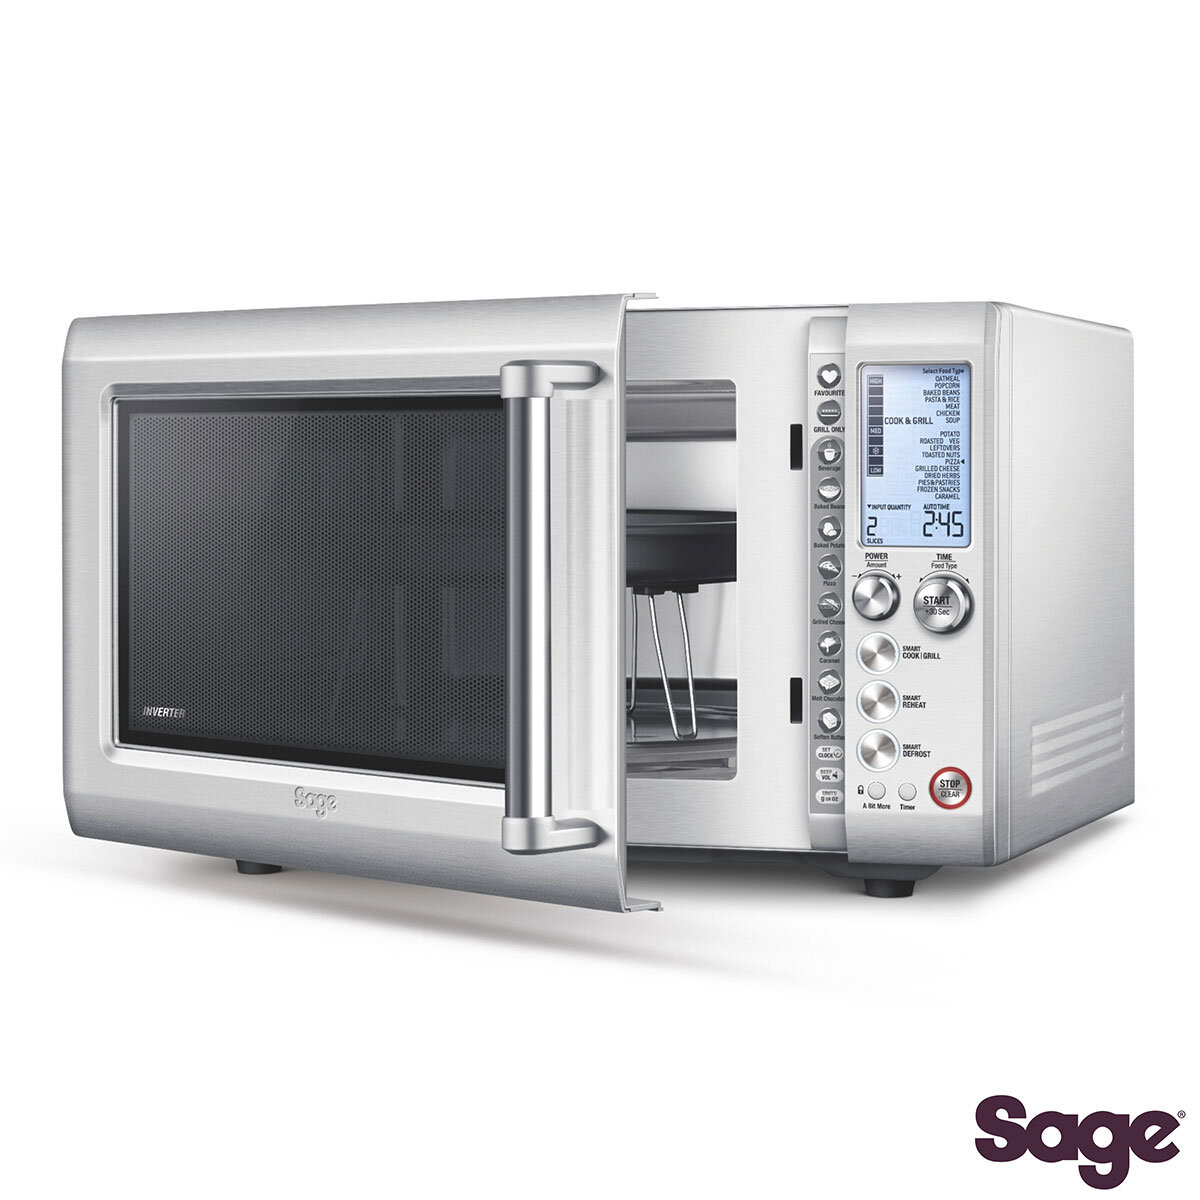 Sage Quick Touch Crisp Microwave in Brushed Stainless Steel, BMO700BSS